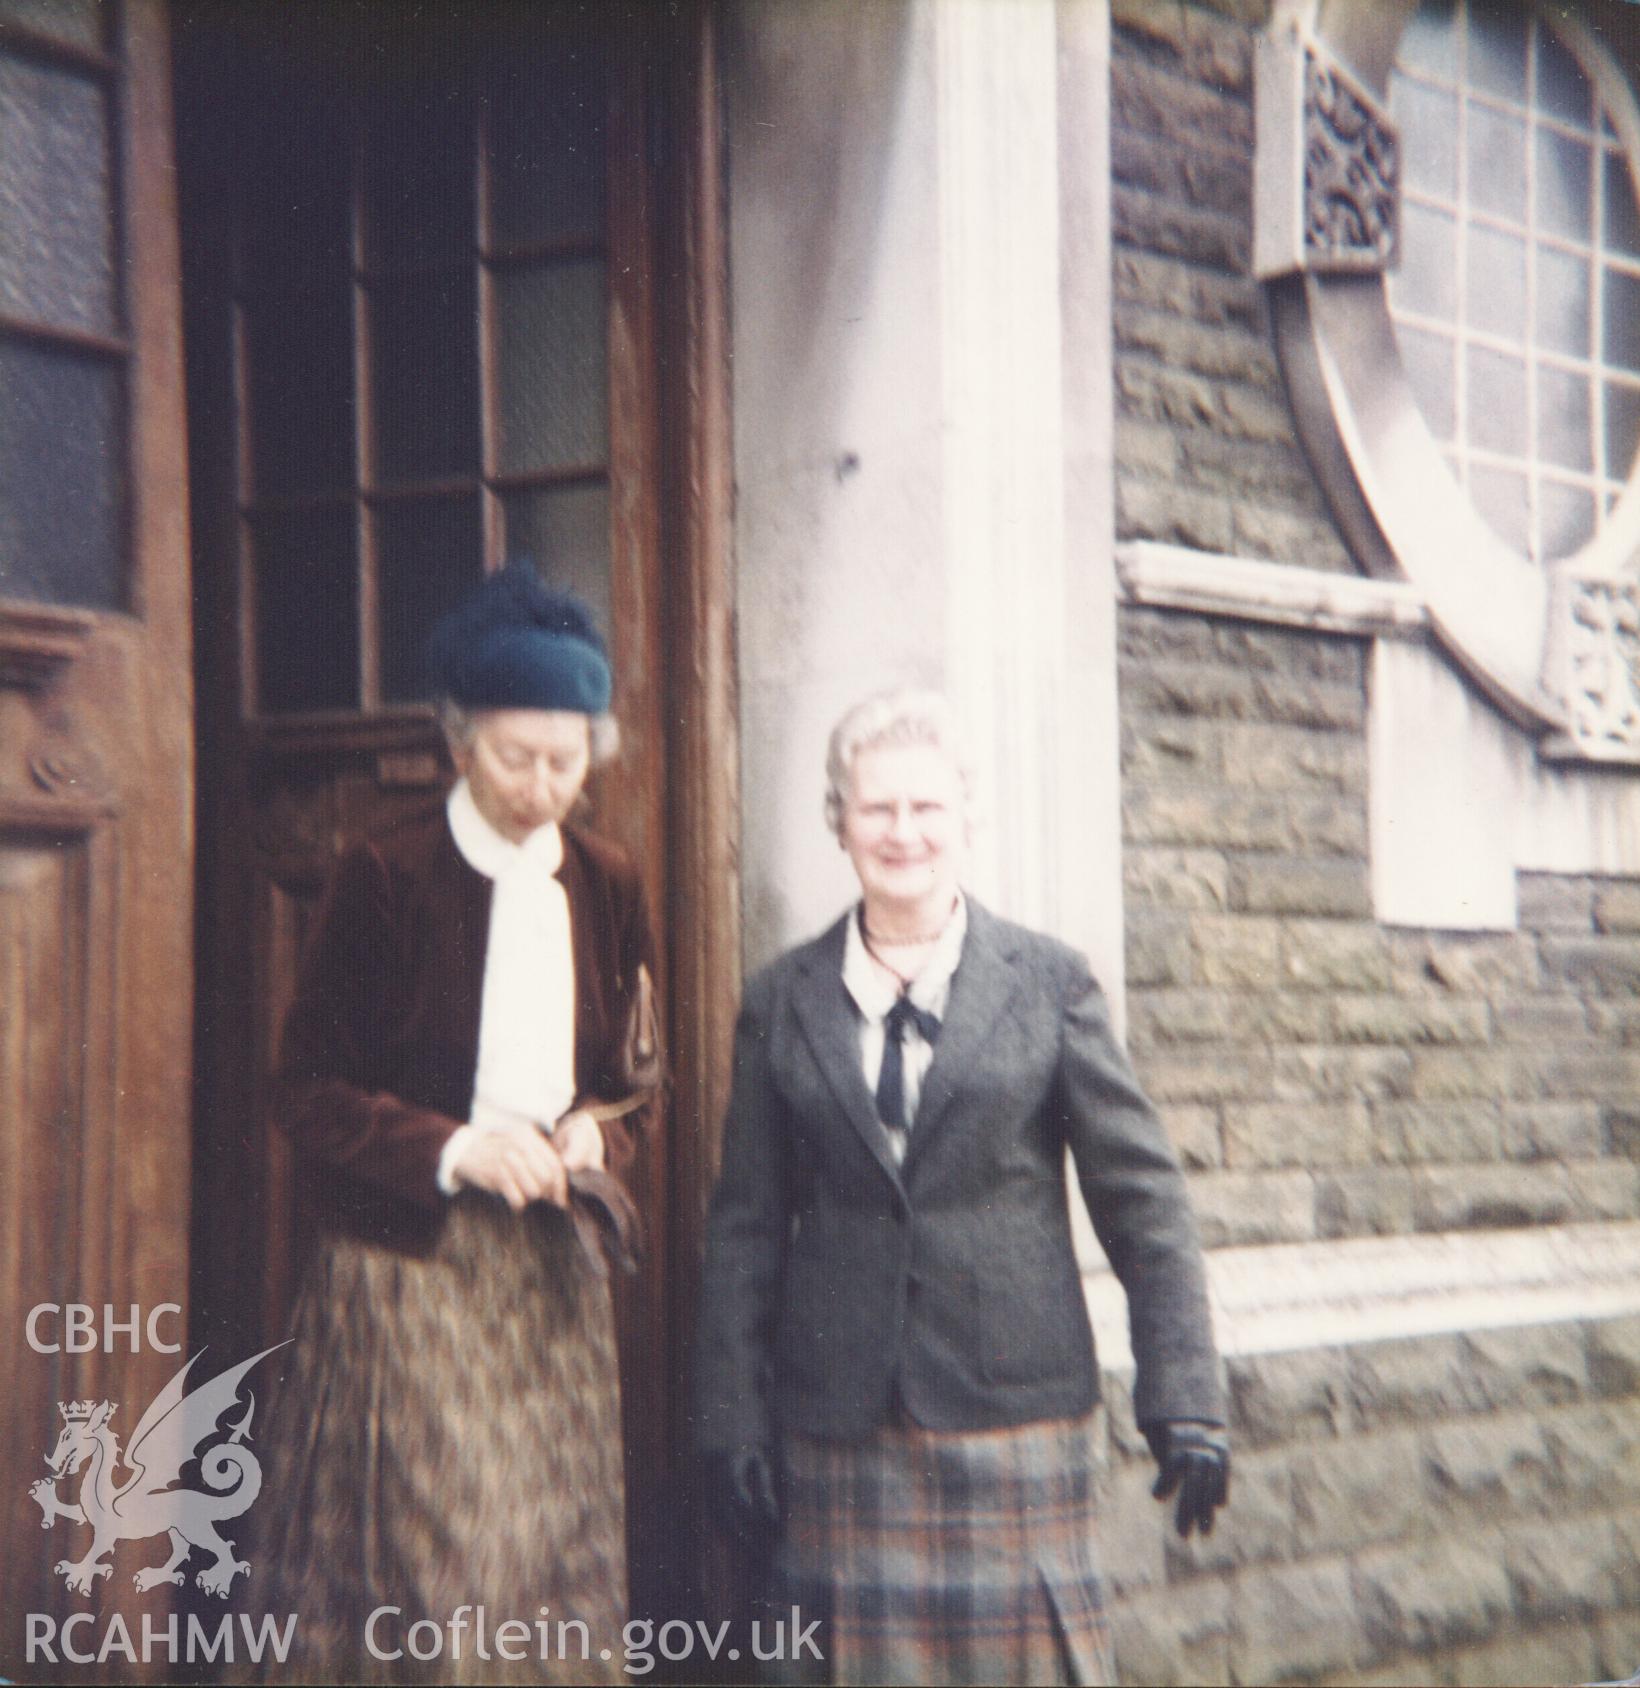 Colour photograph of members of Bethania chapel congregation outside the front facade, 26th March 1985. Donated to the RCAHMW by Cyril Philips as part of the Digital Dissent Project.